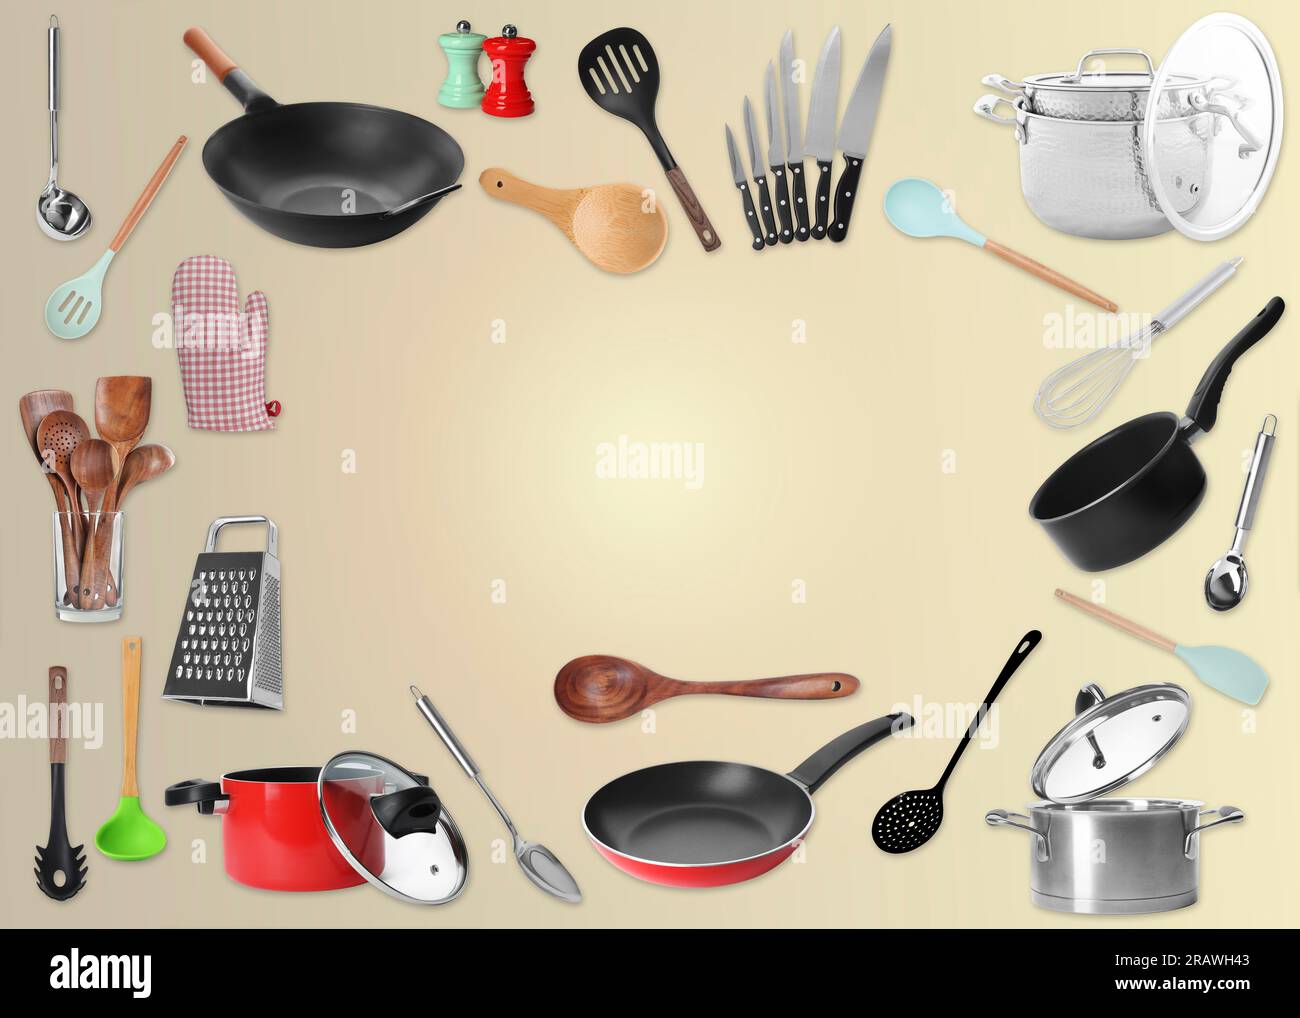 https://c8.alamy.com/comp/2RAWH43/frame-of-different-kitchenware-on-beige-background-space-for-text-2RAWH43.jpg